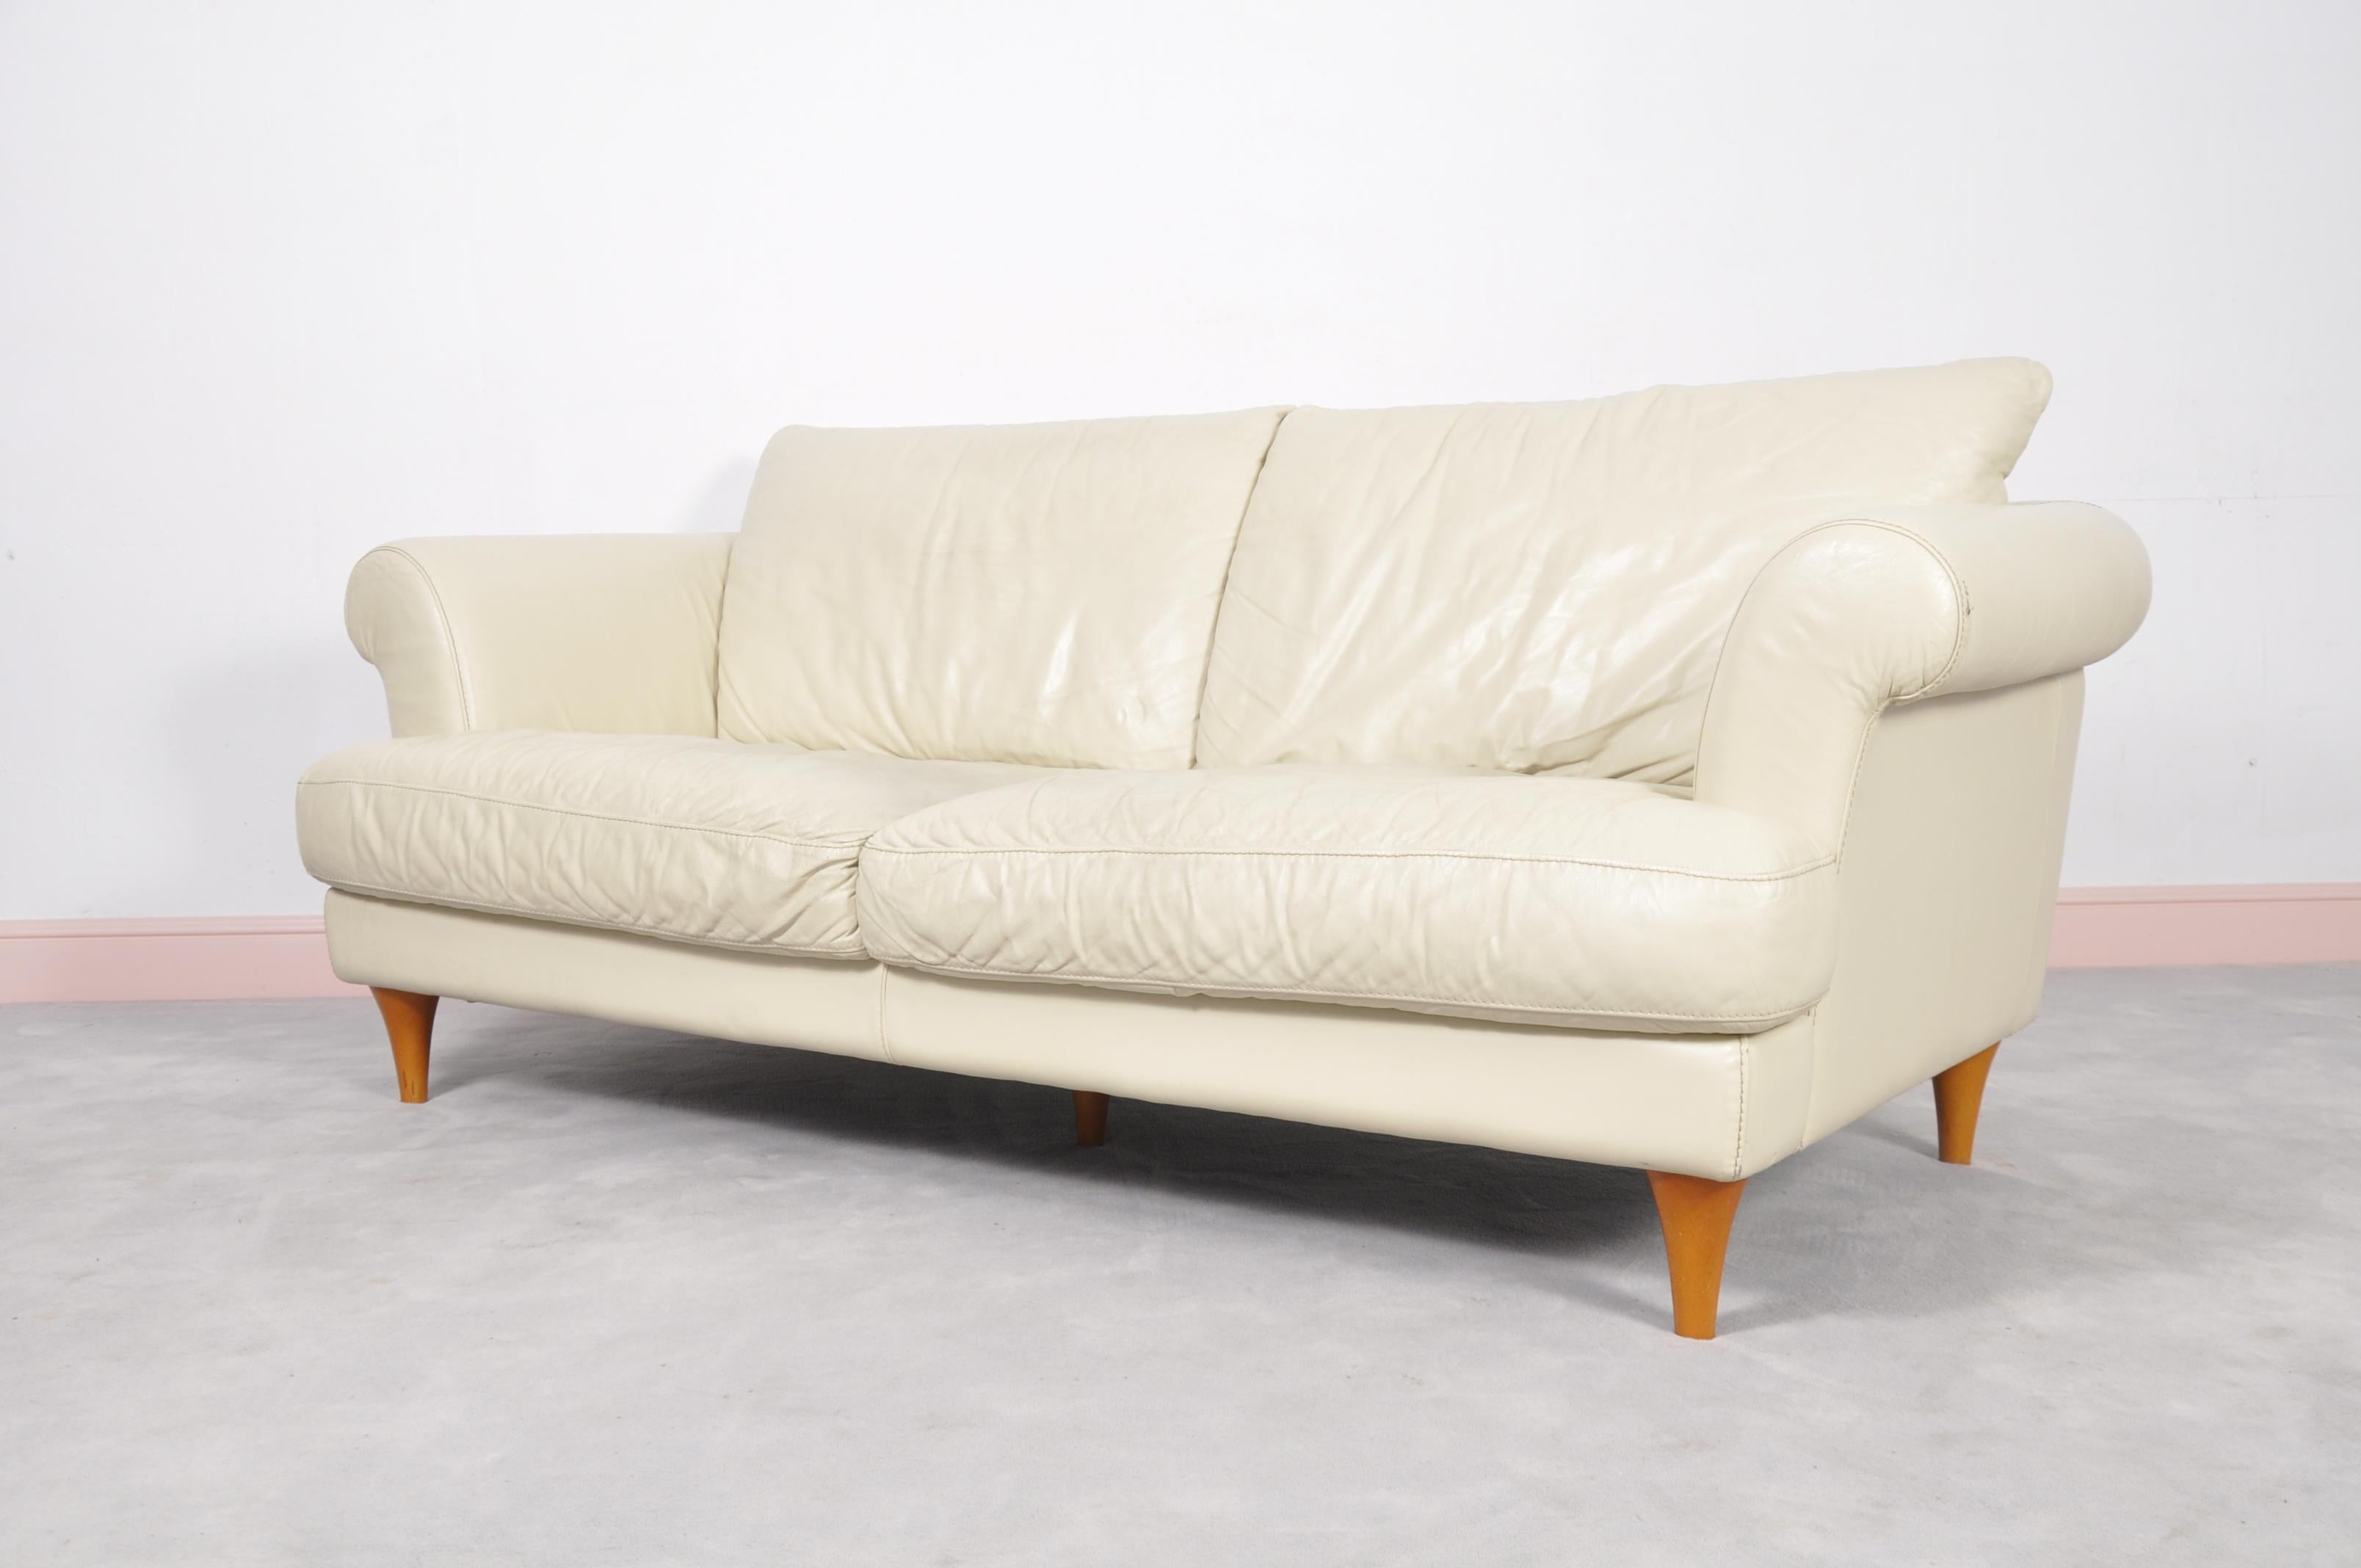 Fabulous Italian three-seat sofa. Great look with a dynamic design and super comfortable too!